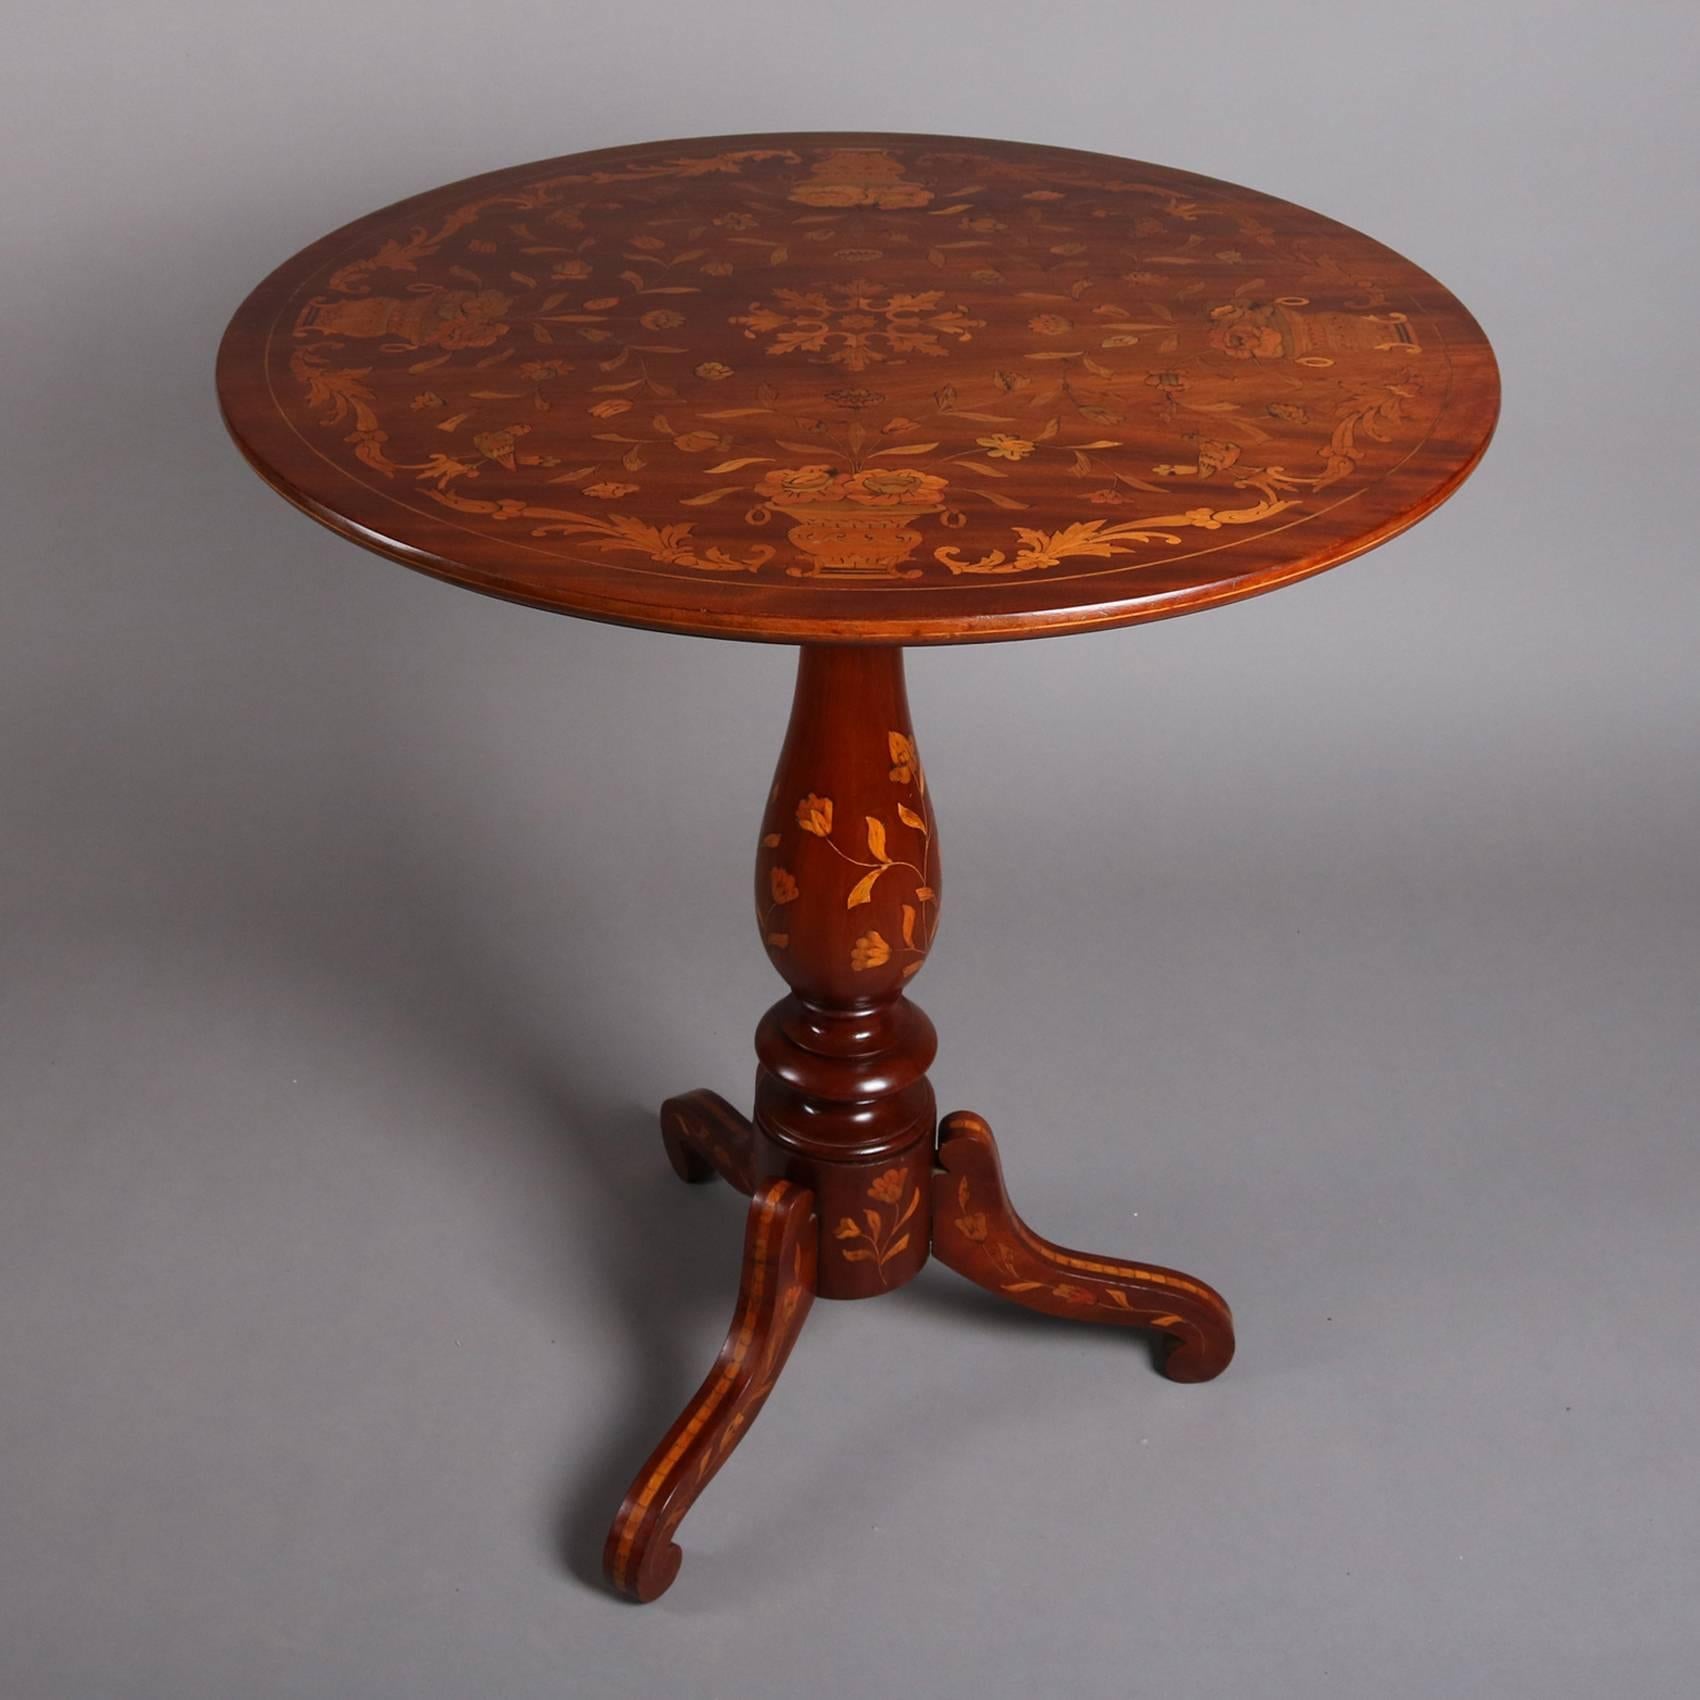 European Antique Mahogany & Satinwood Floral Marquetry Inlaid Tilt-Top Table 19th Century